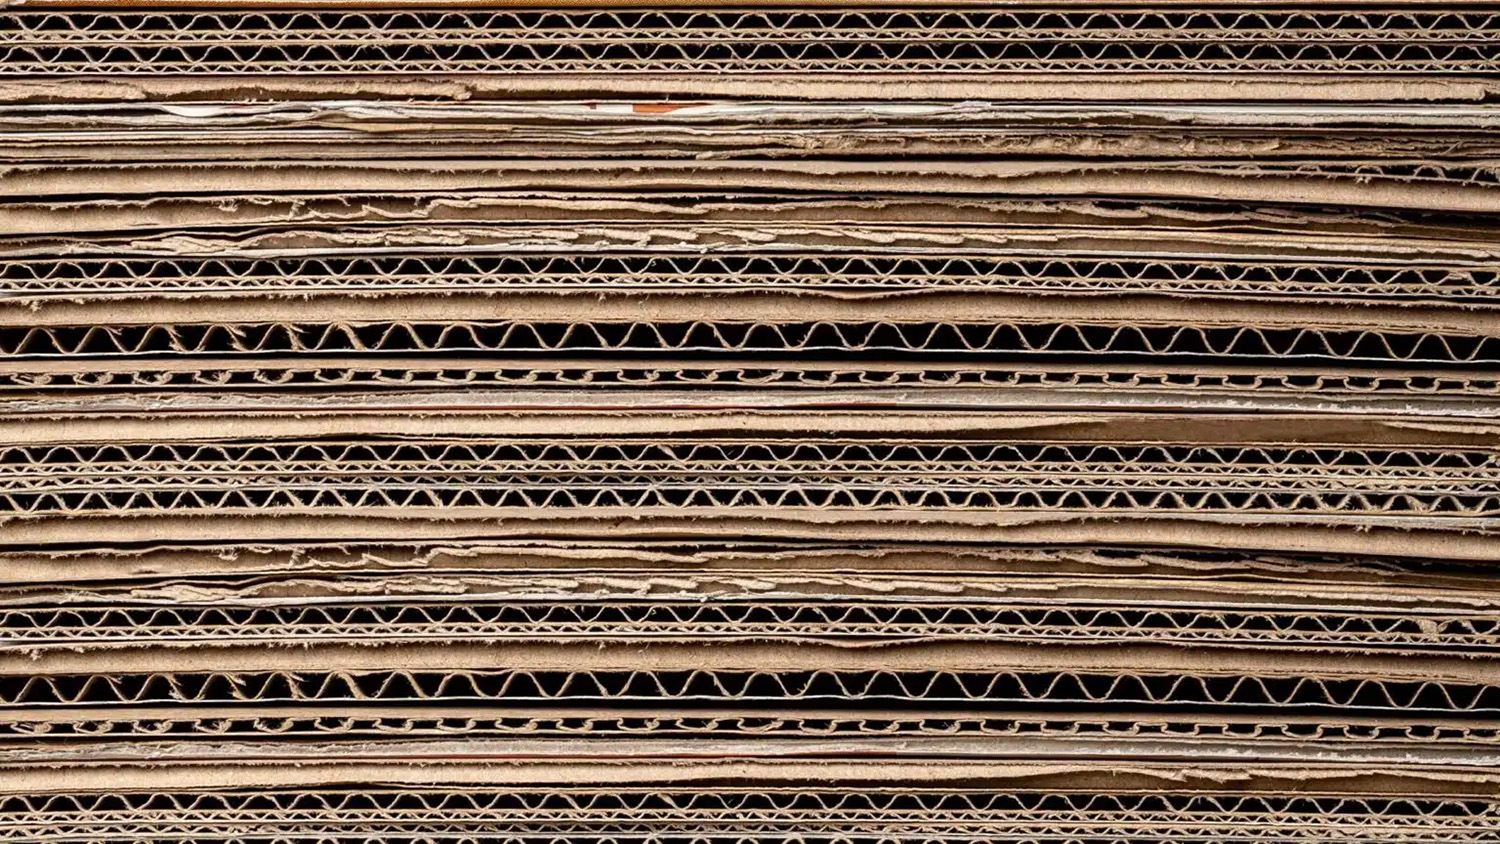 A stack of cardboard.